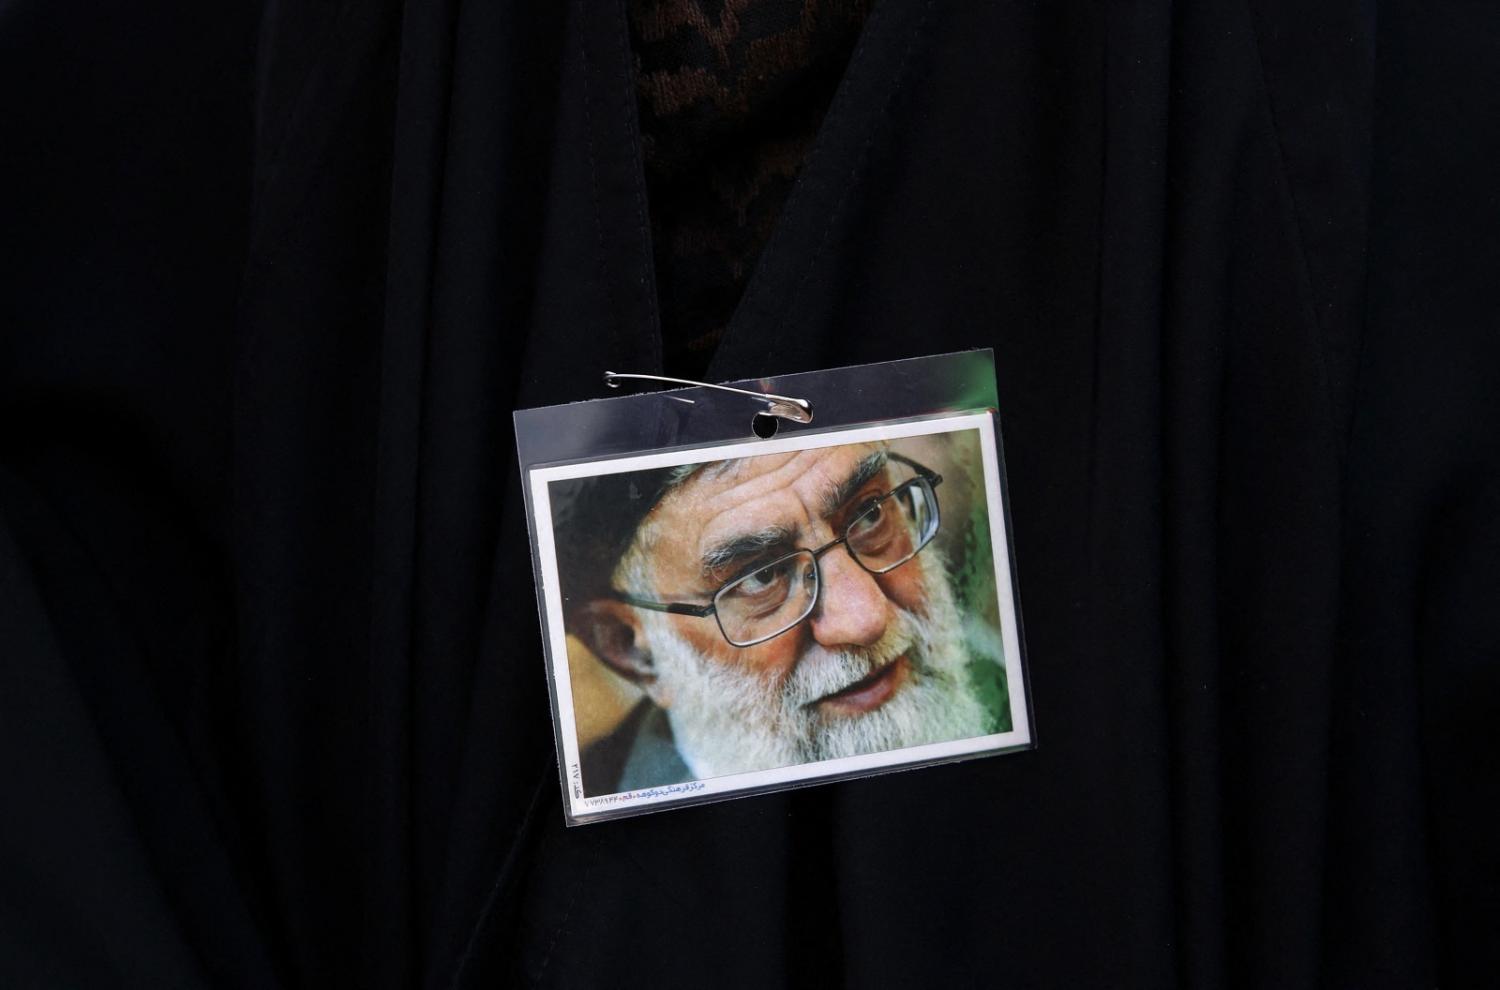 An Iranian pro-government protester wears a pin displaying a portrait of Supreme Leader Ayatollah Ali Khamenei during a rally against anti-government protests in Iran, 25 September 2022 (STR/AFP via Getty Images)